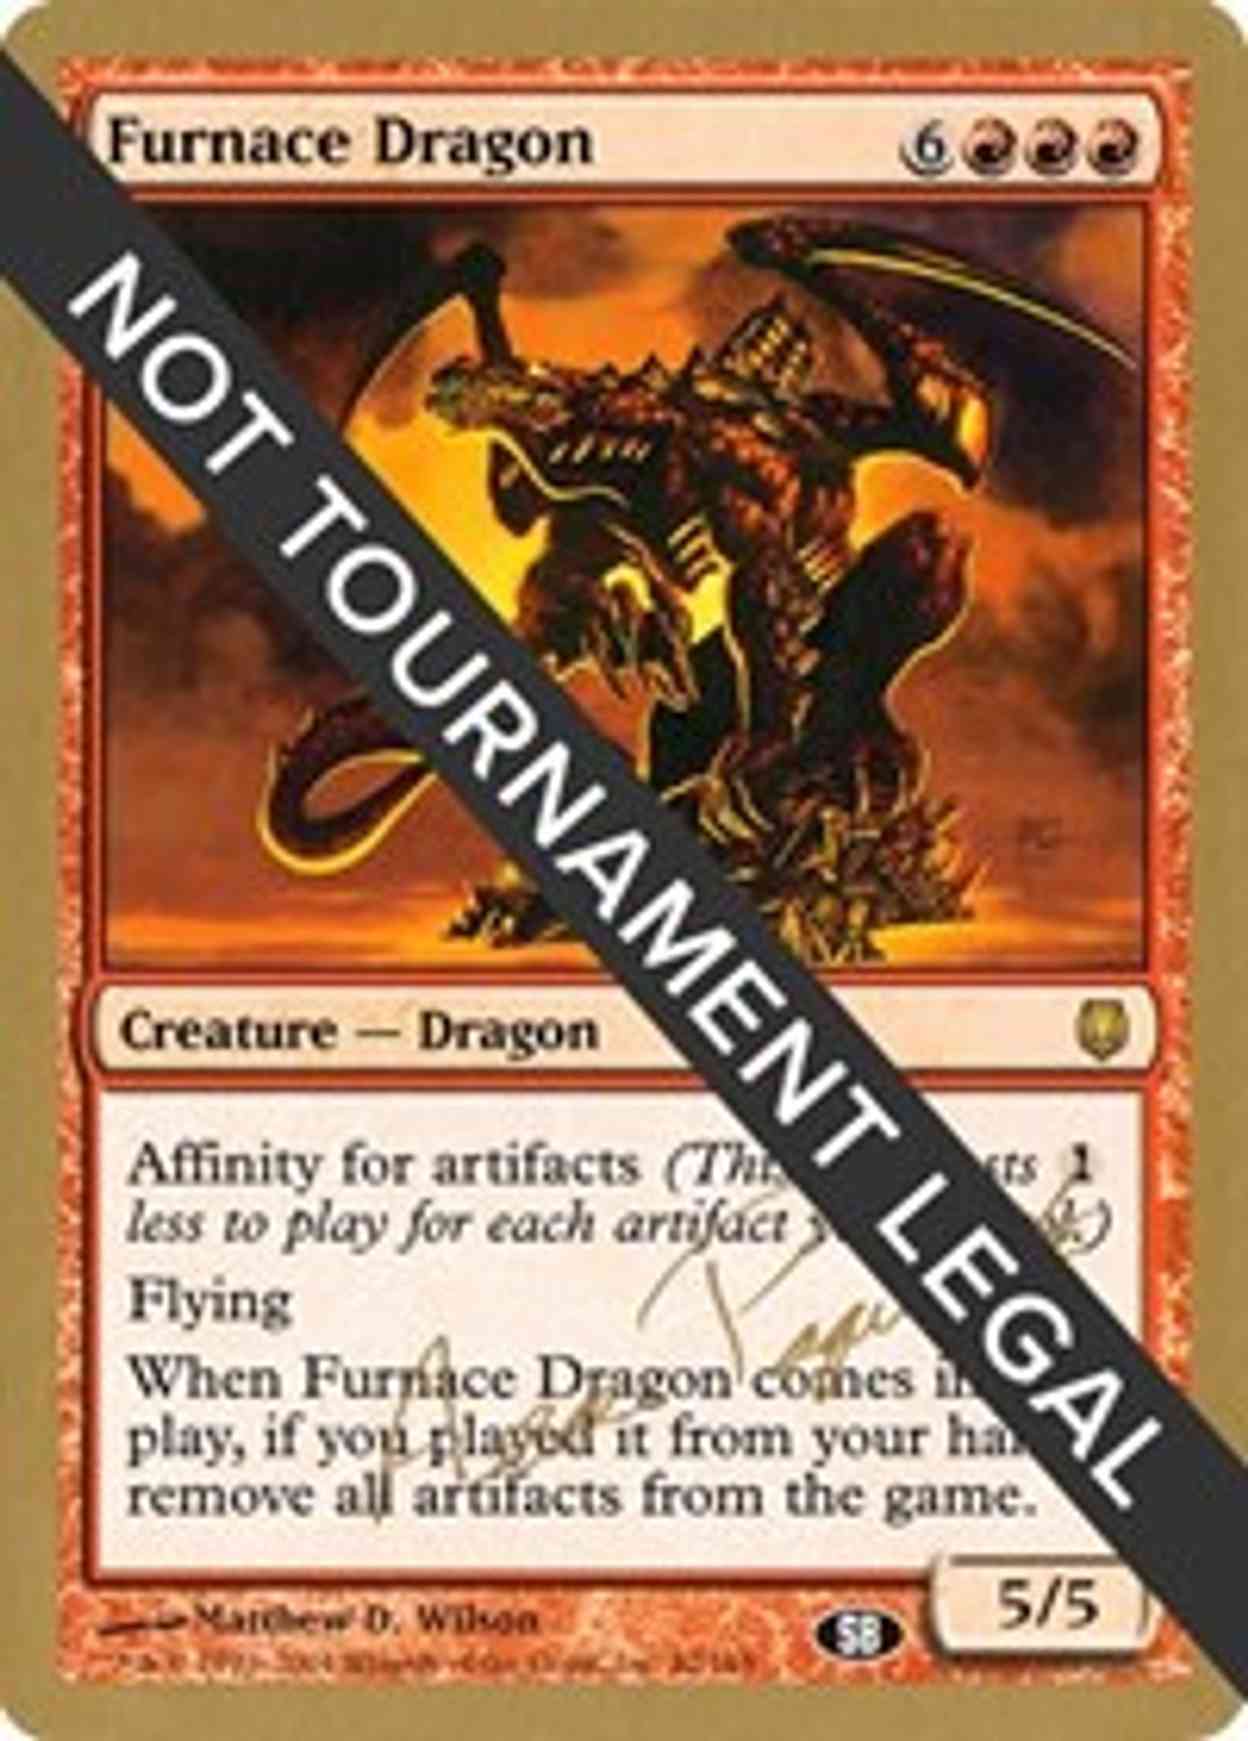 Furnace Dragon - 2004 Aeo Paquette (DST) (SB) magic card front